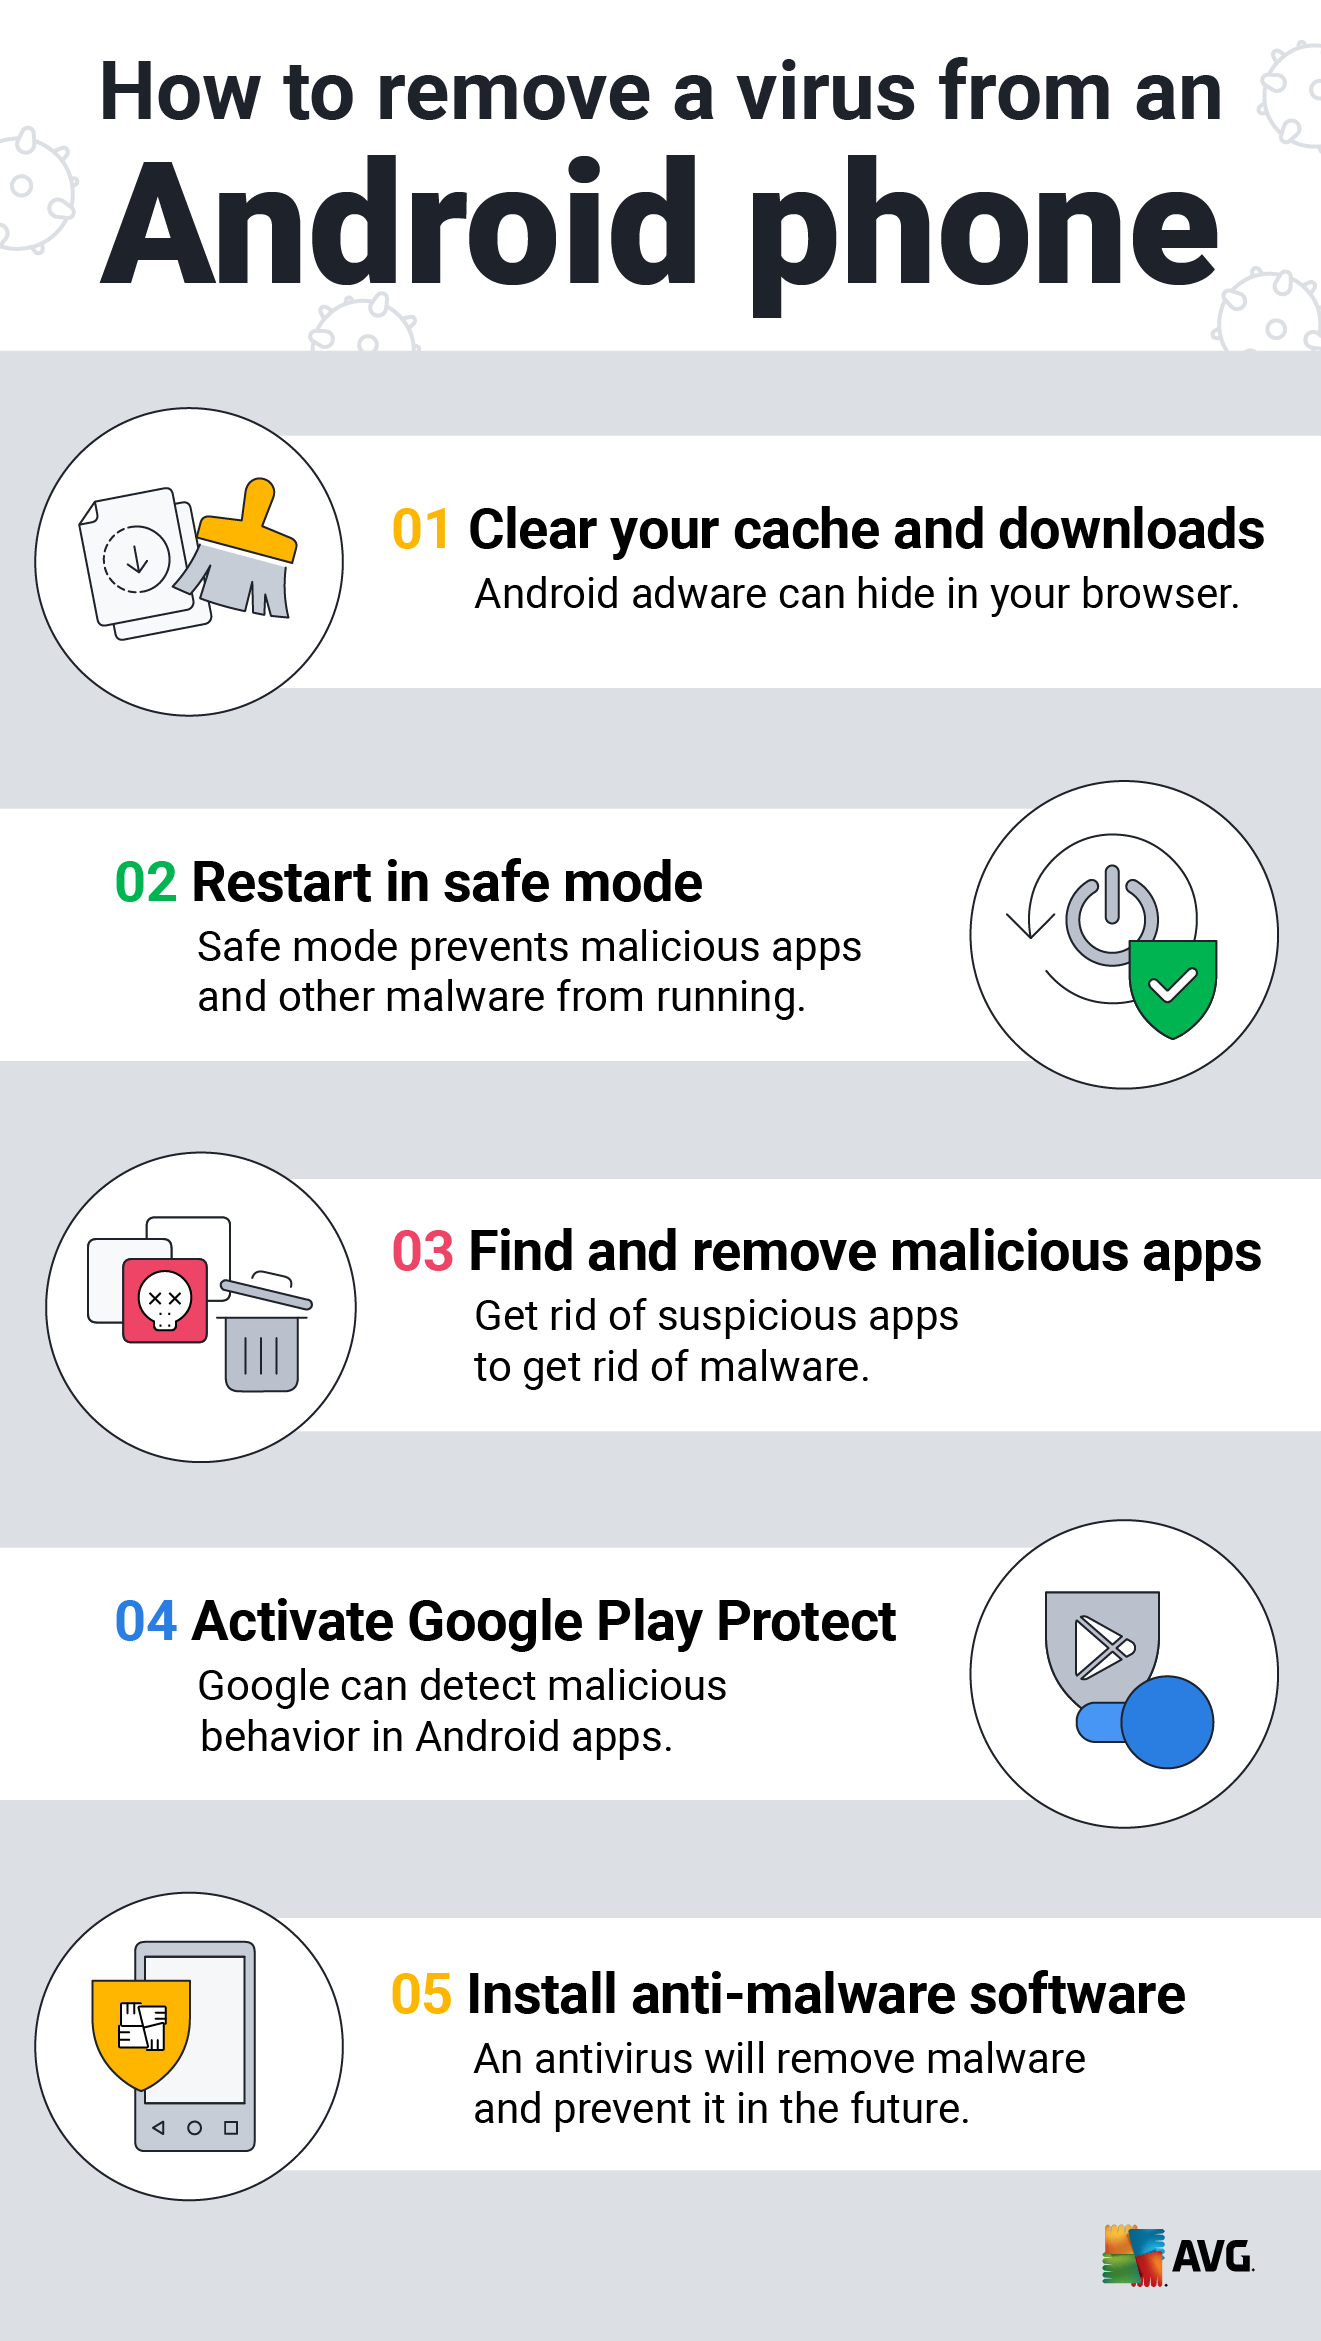 Måned bånd uklar How to Remove a Virus from an Android Phone or iPhone | AVG